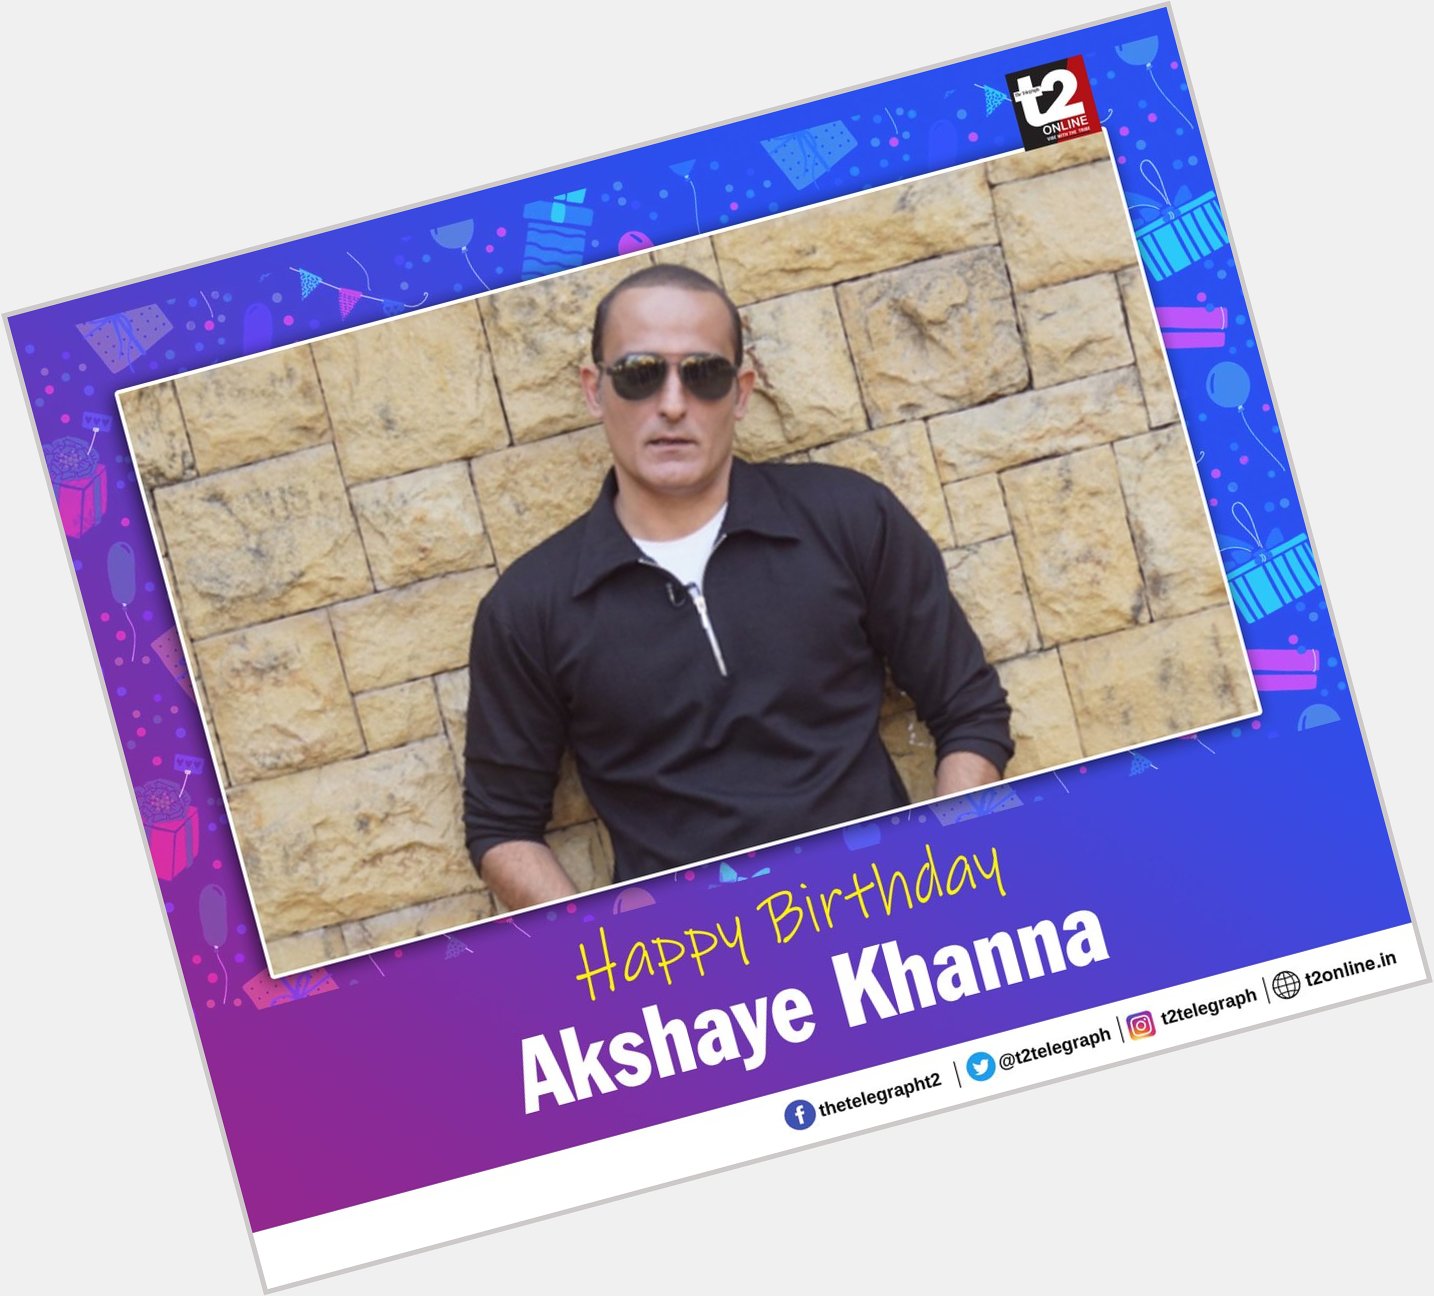 He is the dependable man at the movies. Happy birthday Akshaye Khanna 